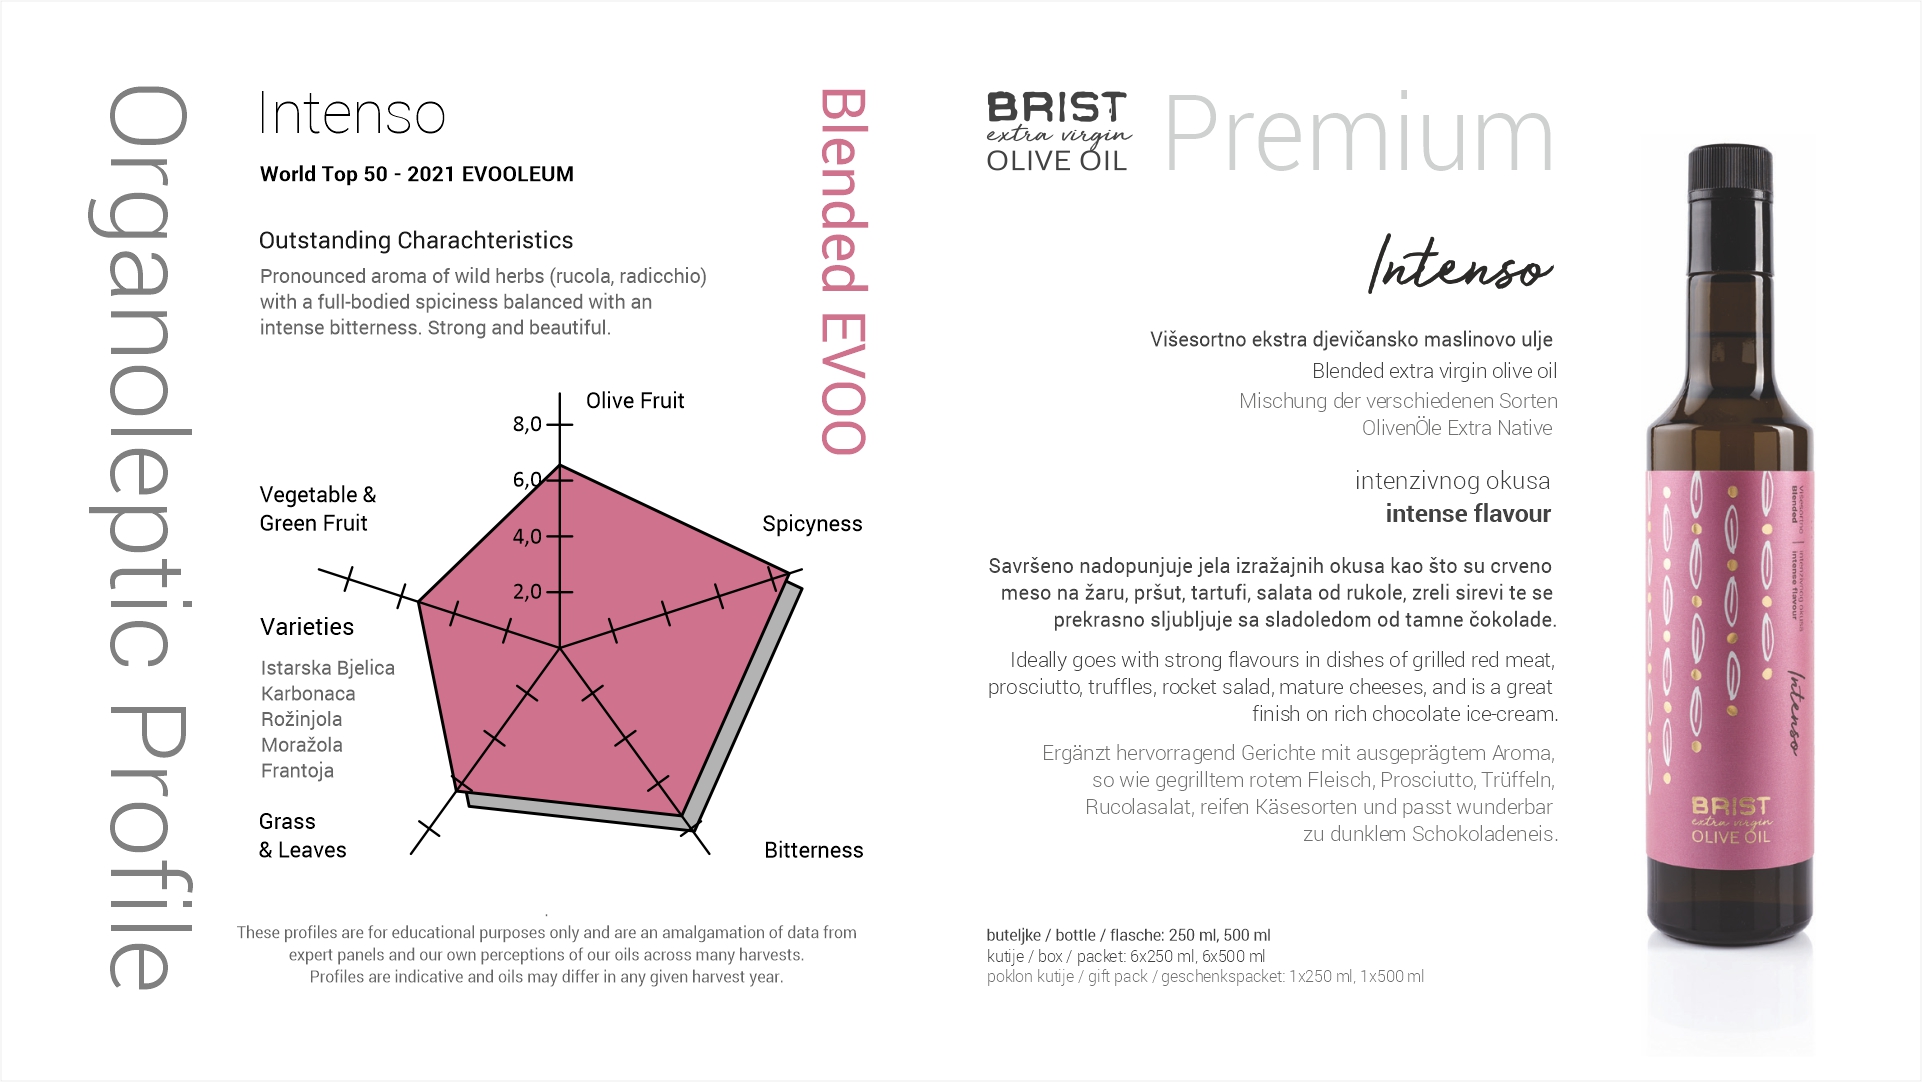 Brochure and Orgaanoleptics - 03 Intenso